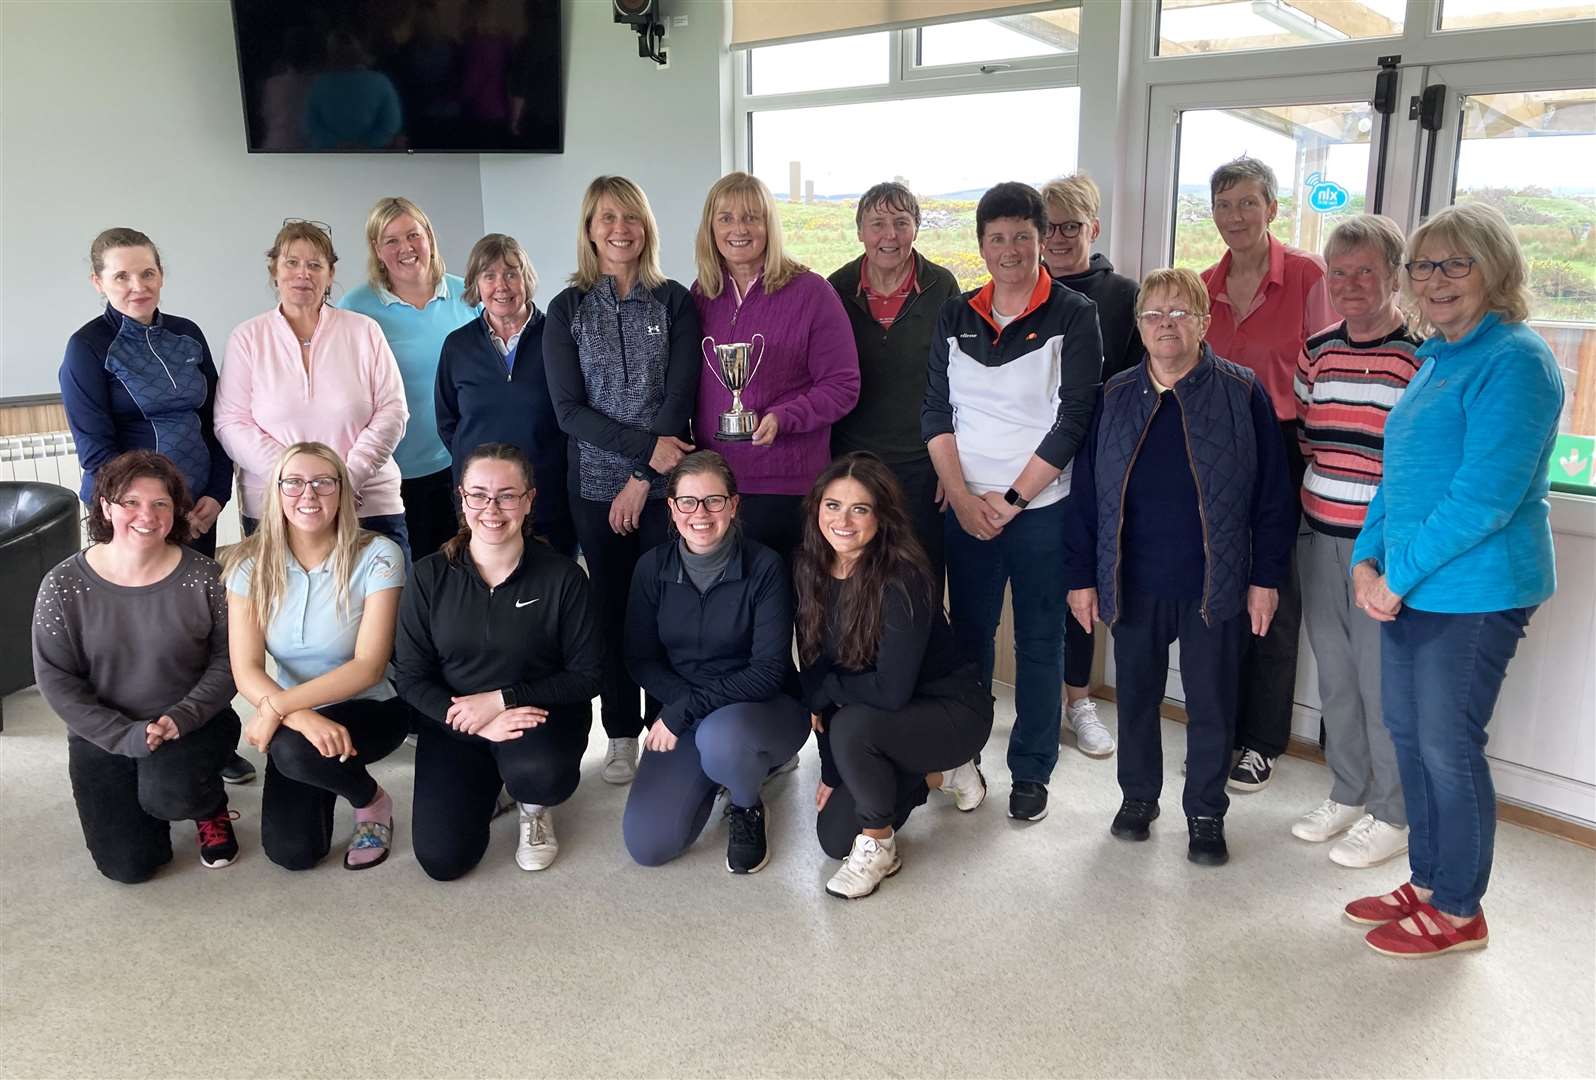 Ladies from Thurso, Reay and Wick golf clubs who took part in the Americas Cup matchplay competition at the Thurso course.